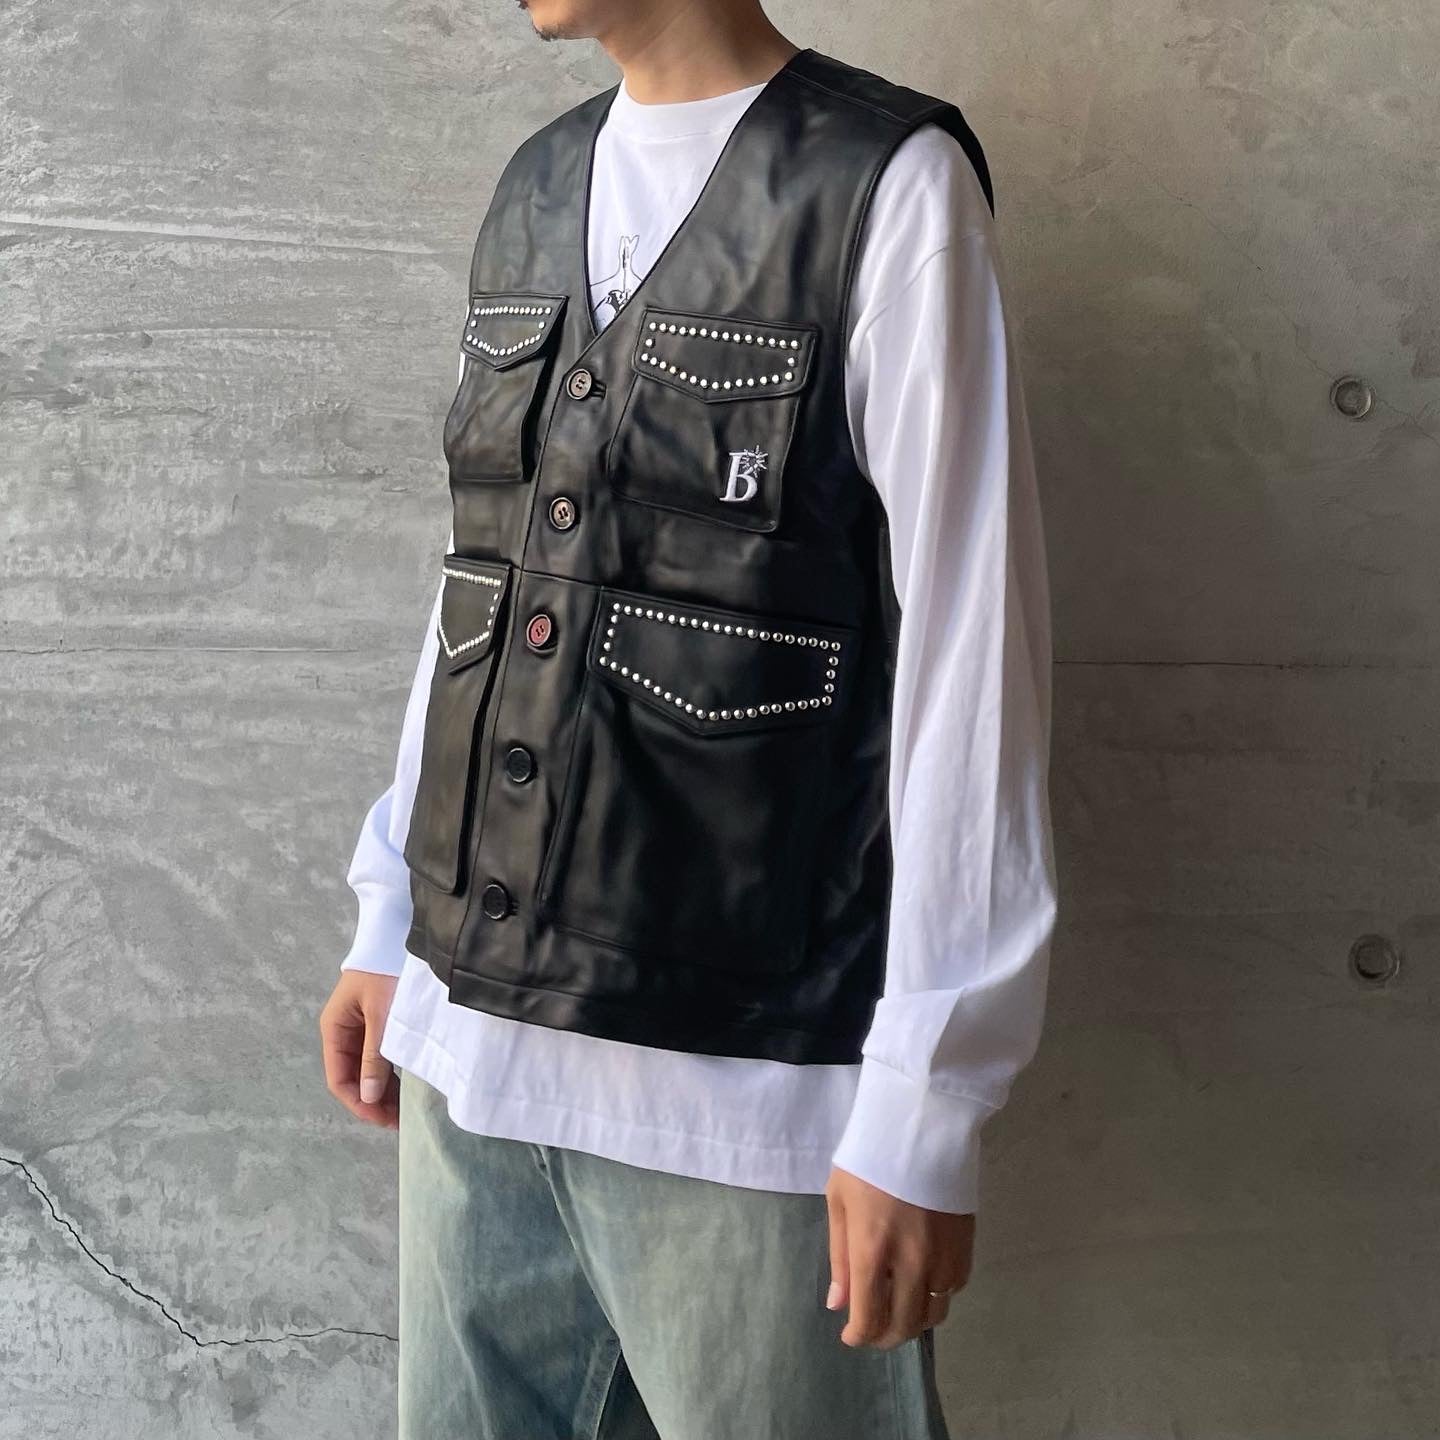 BoTT(ボット) / Studded Leather vest | 公式通販・JACK in the NET